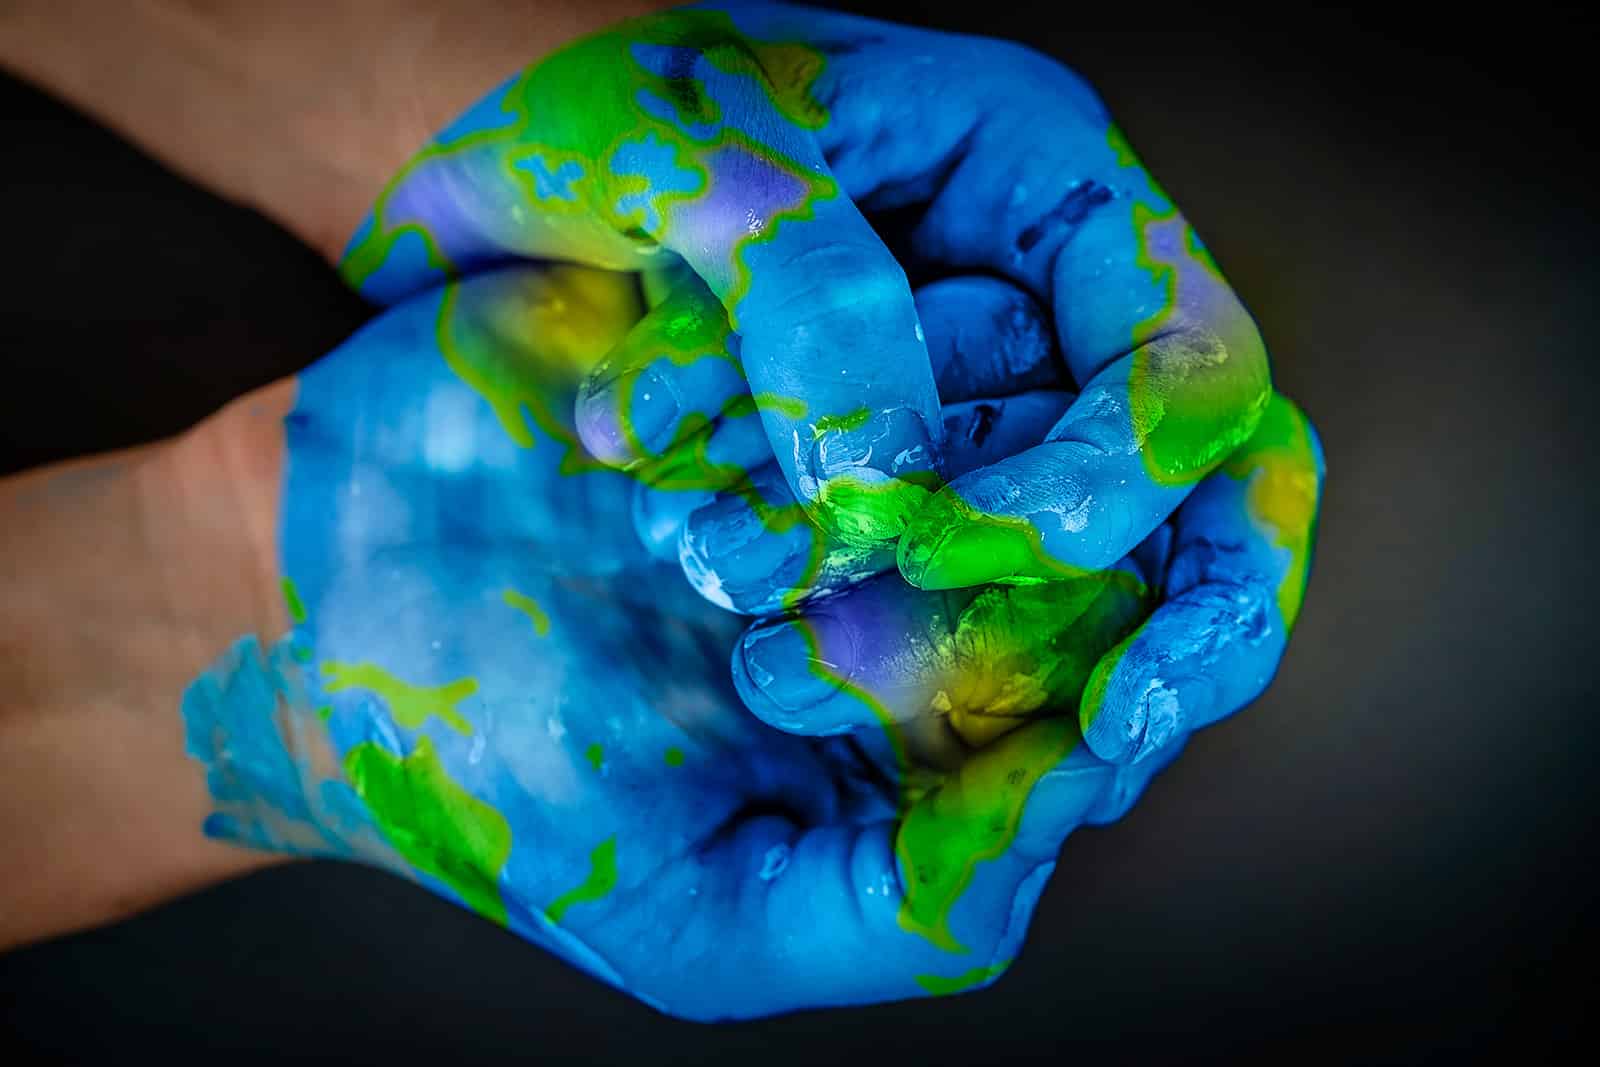 Collaborating for a Better World - The Network of Artists for a Green Planet